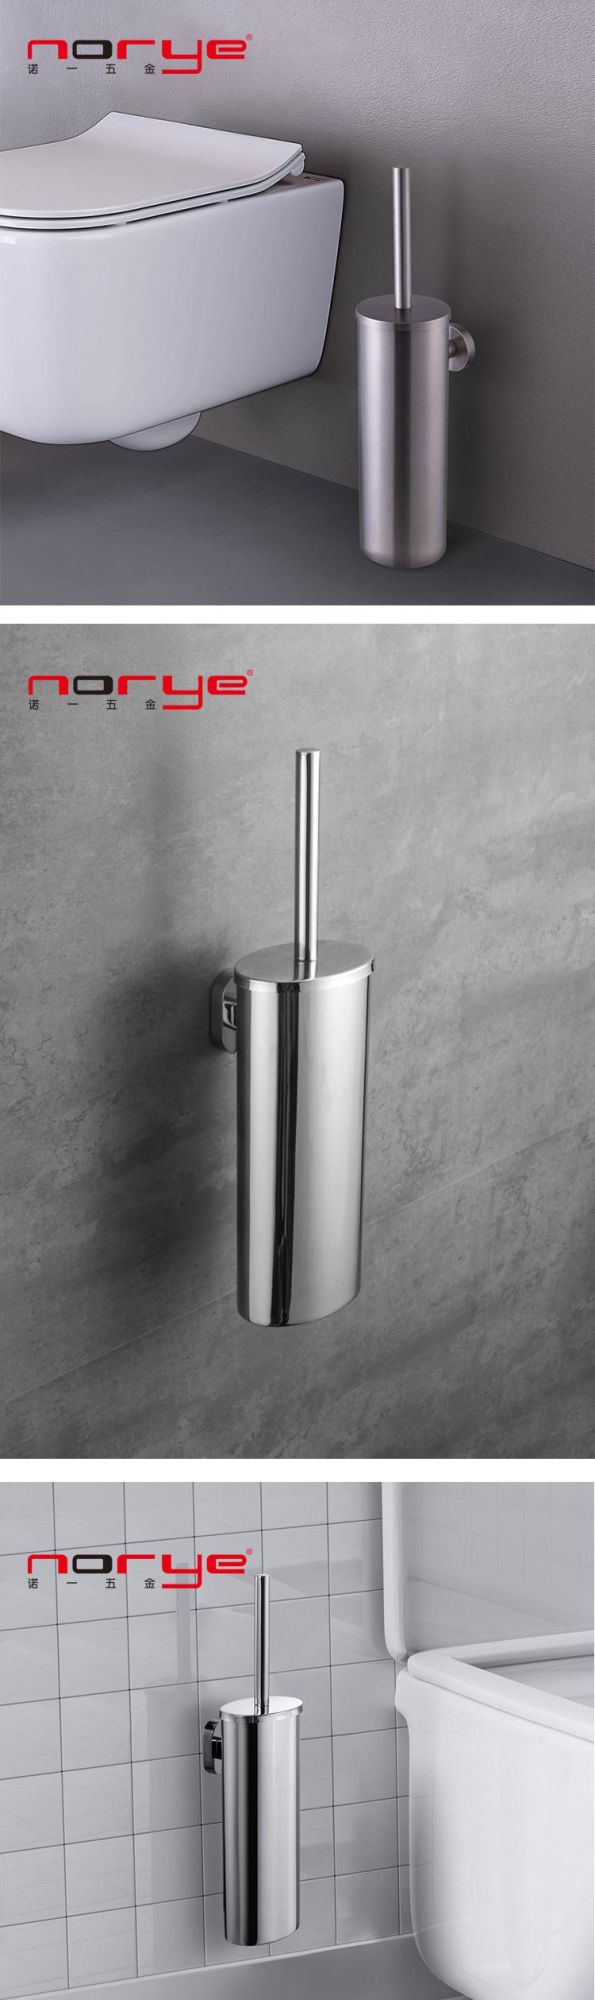 Bathroom Accessories Hotel Toilet Brush Holder with Holder Stainless Steel